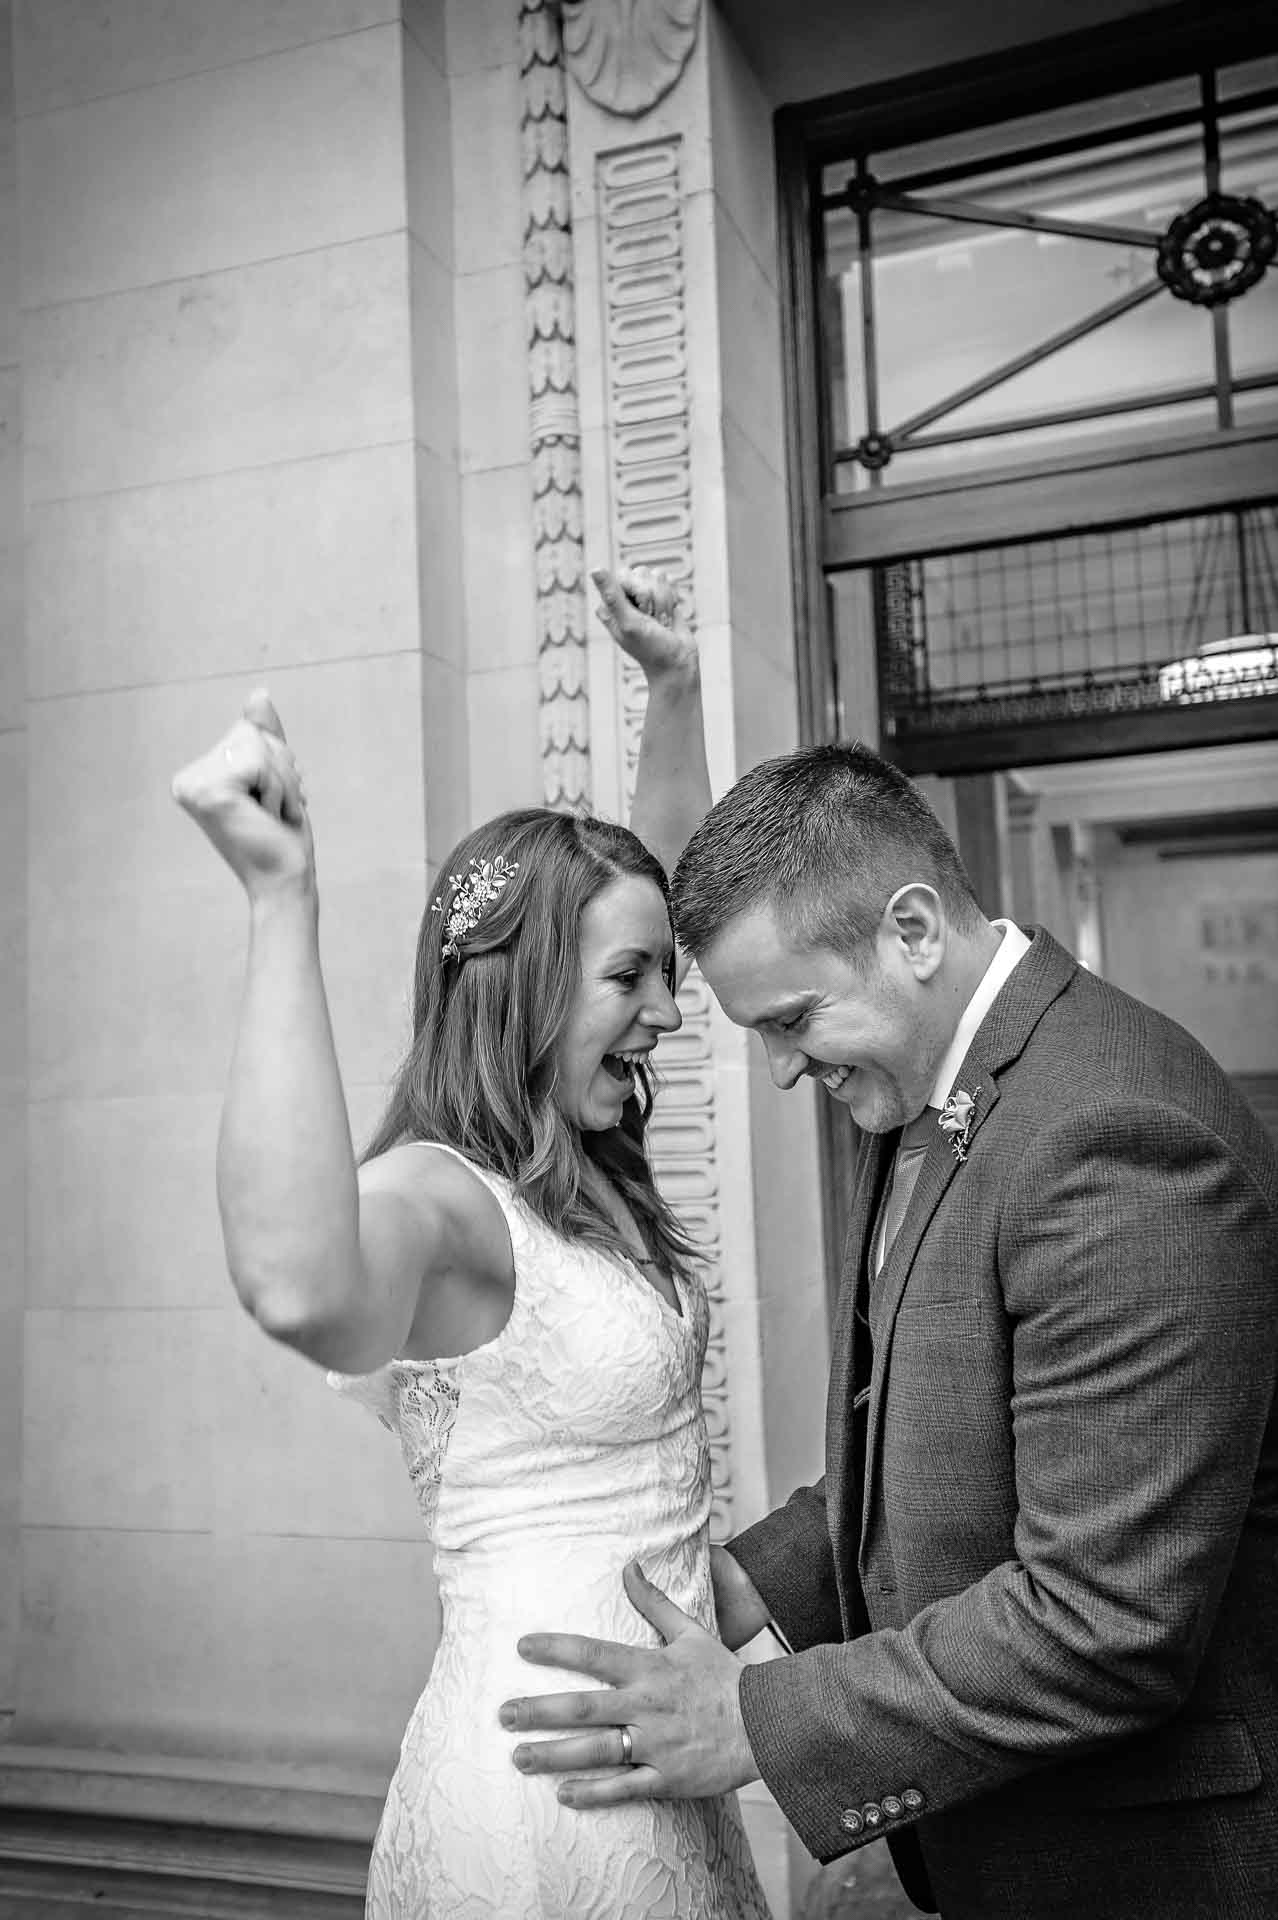 Bride waving arms in the air while groom holds her